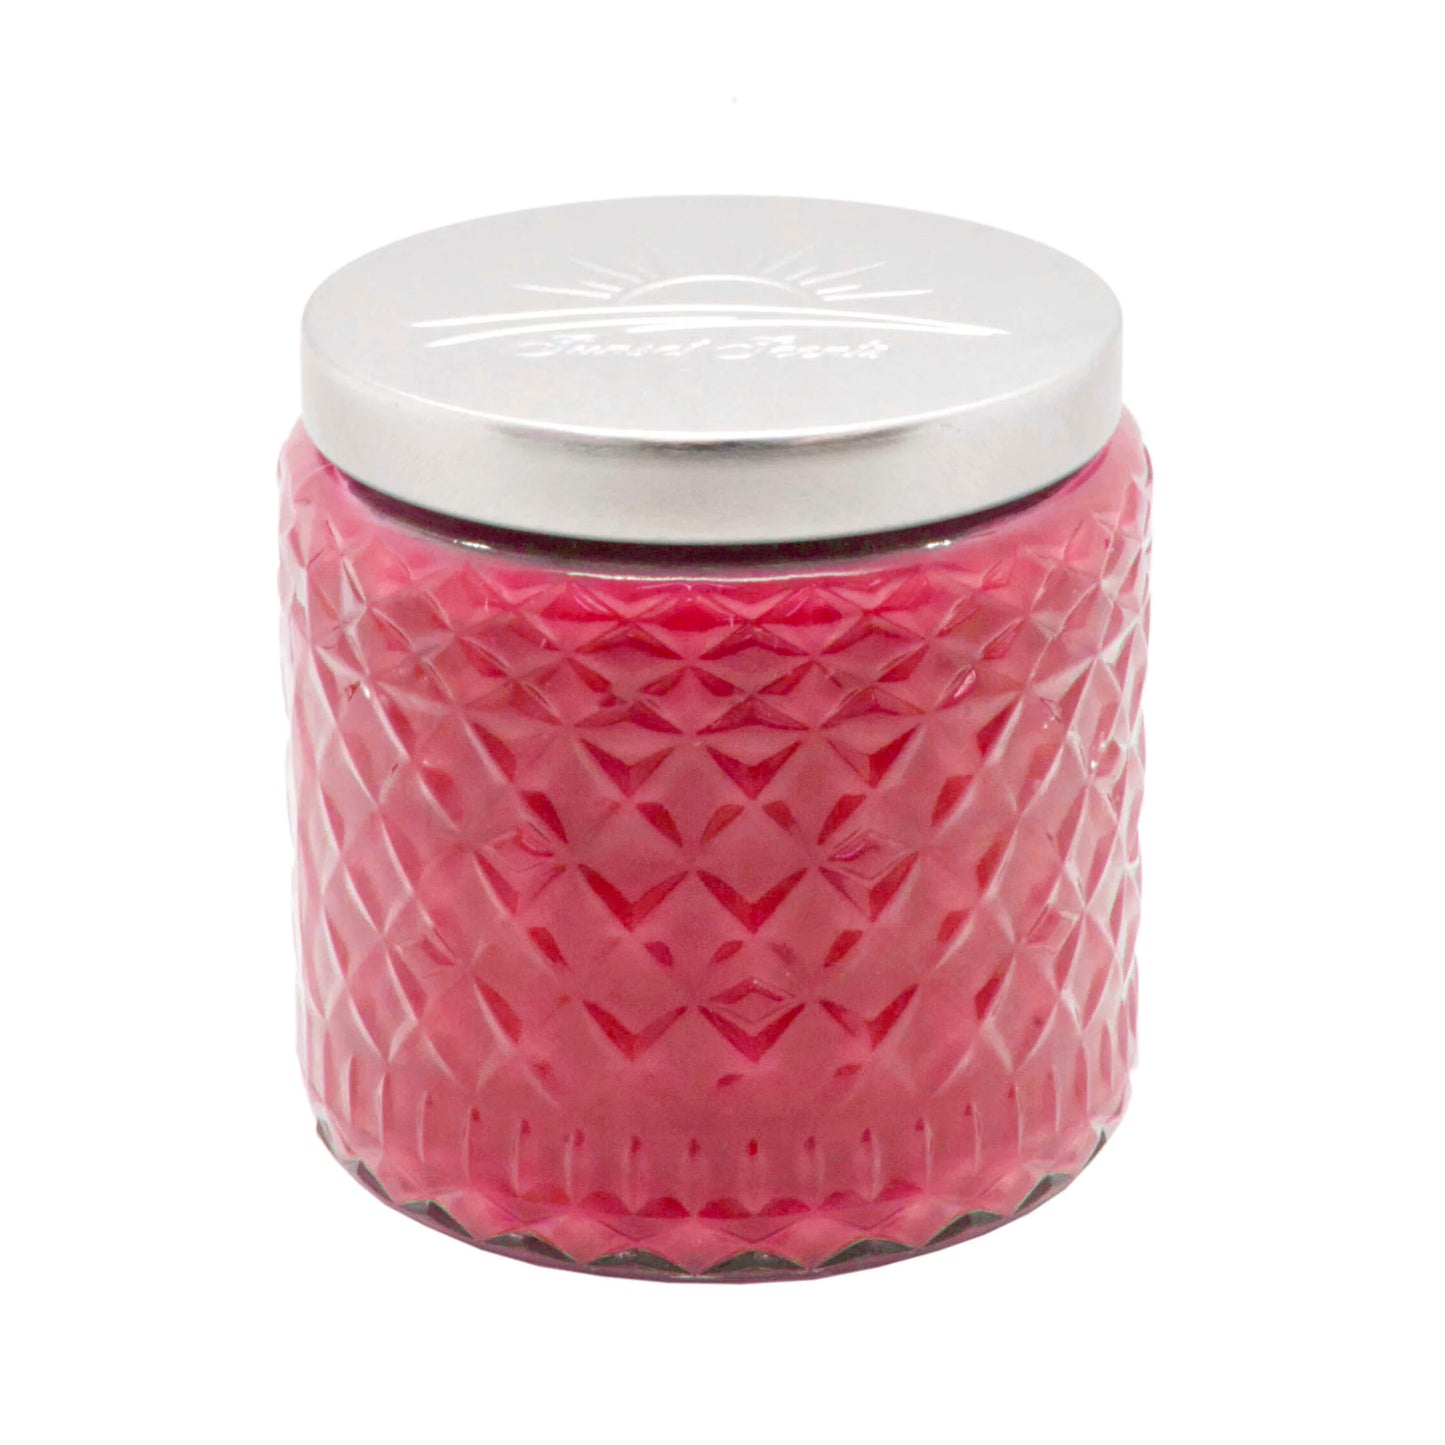 Cherry Fizz Scented Candle 16oz